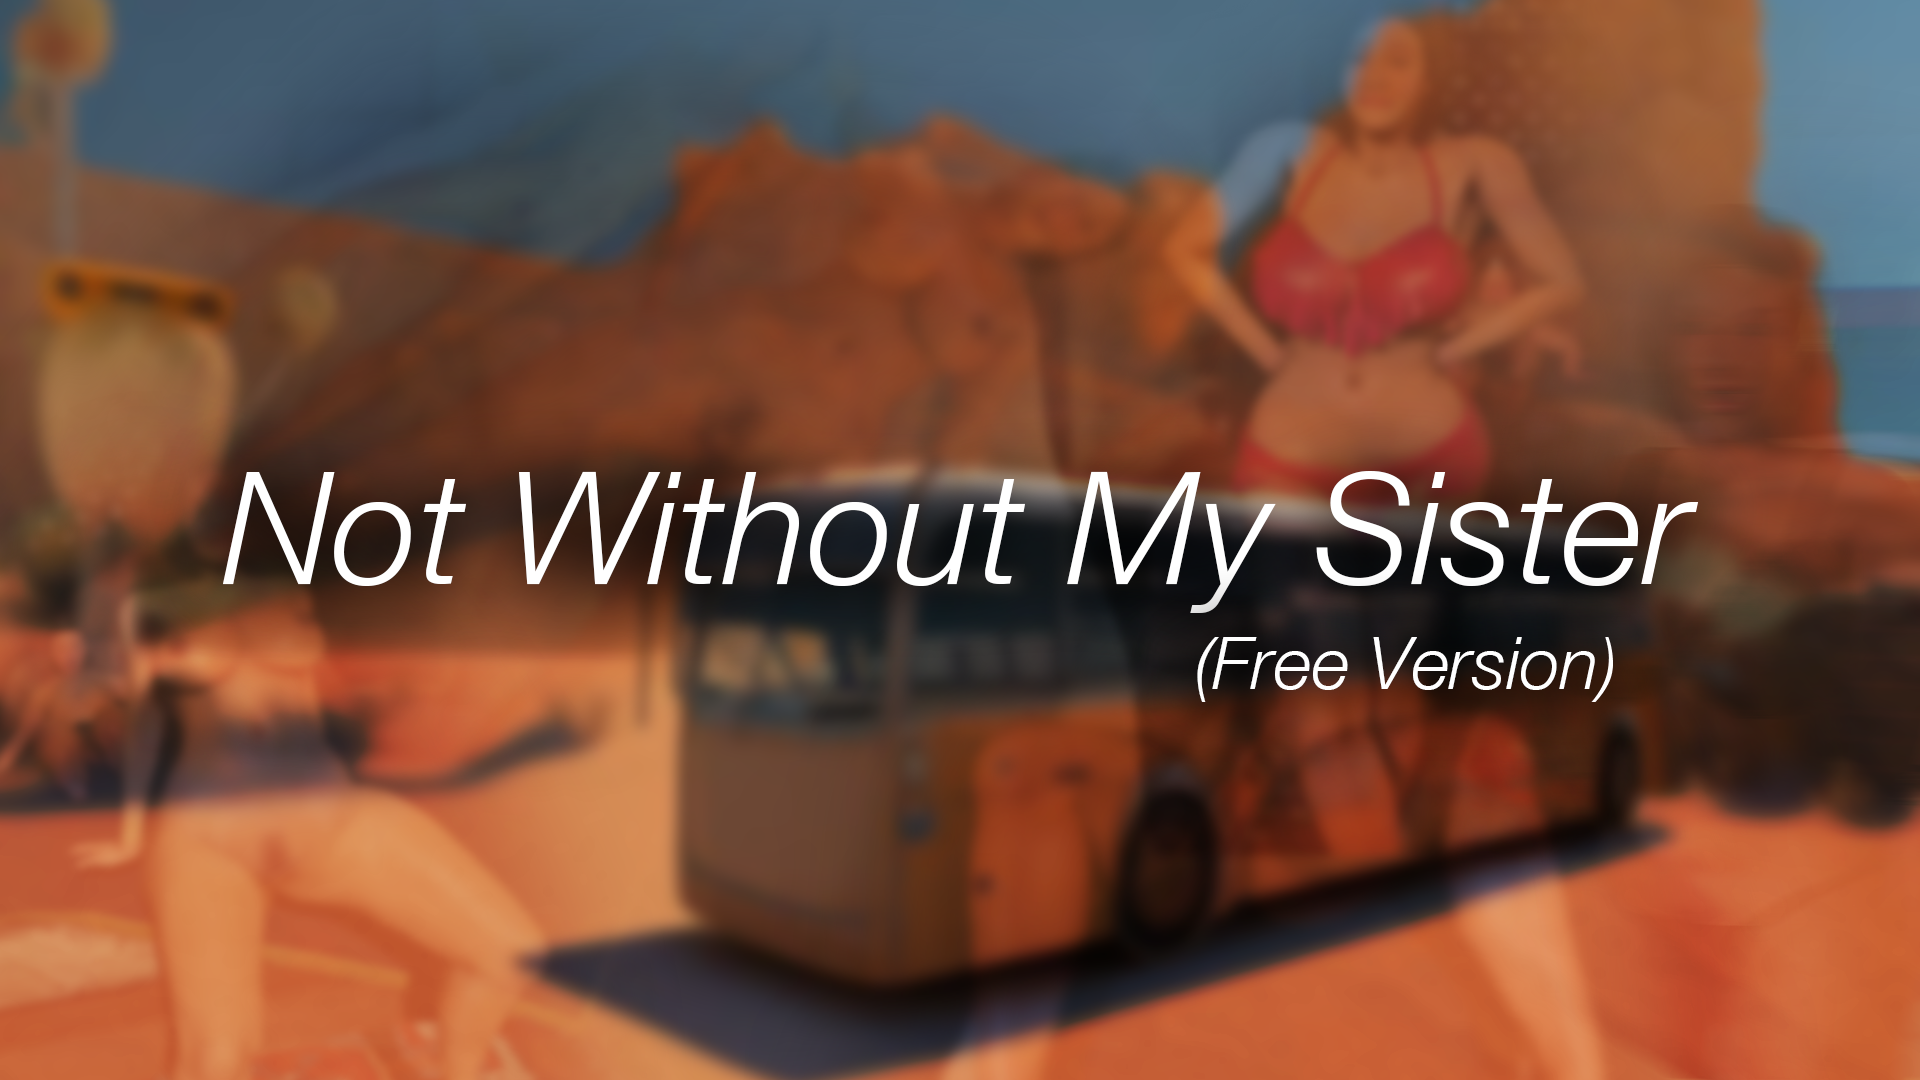 Not Without My Sister - Free Version